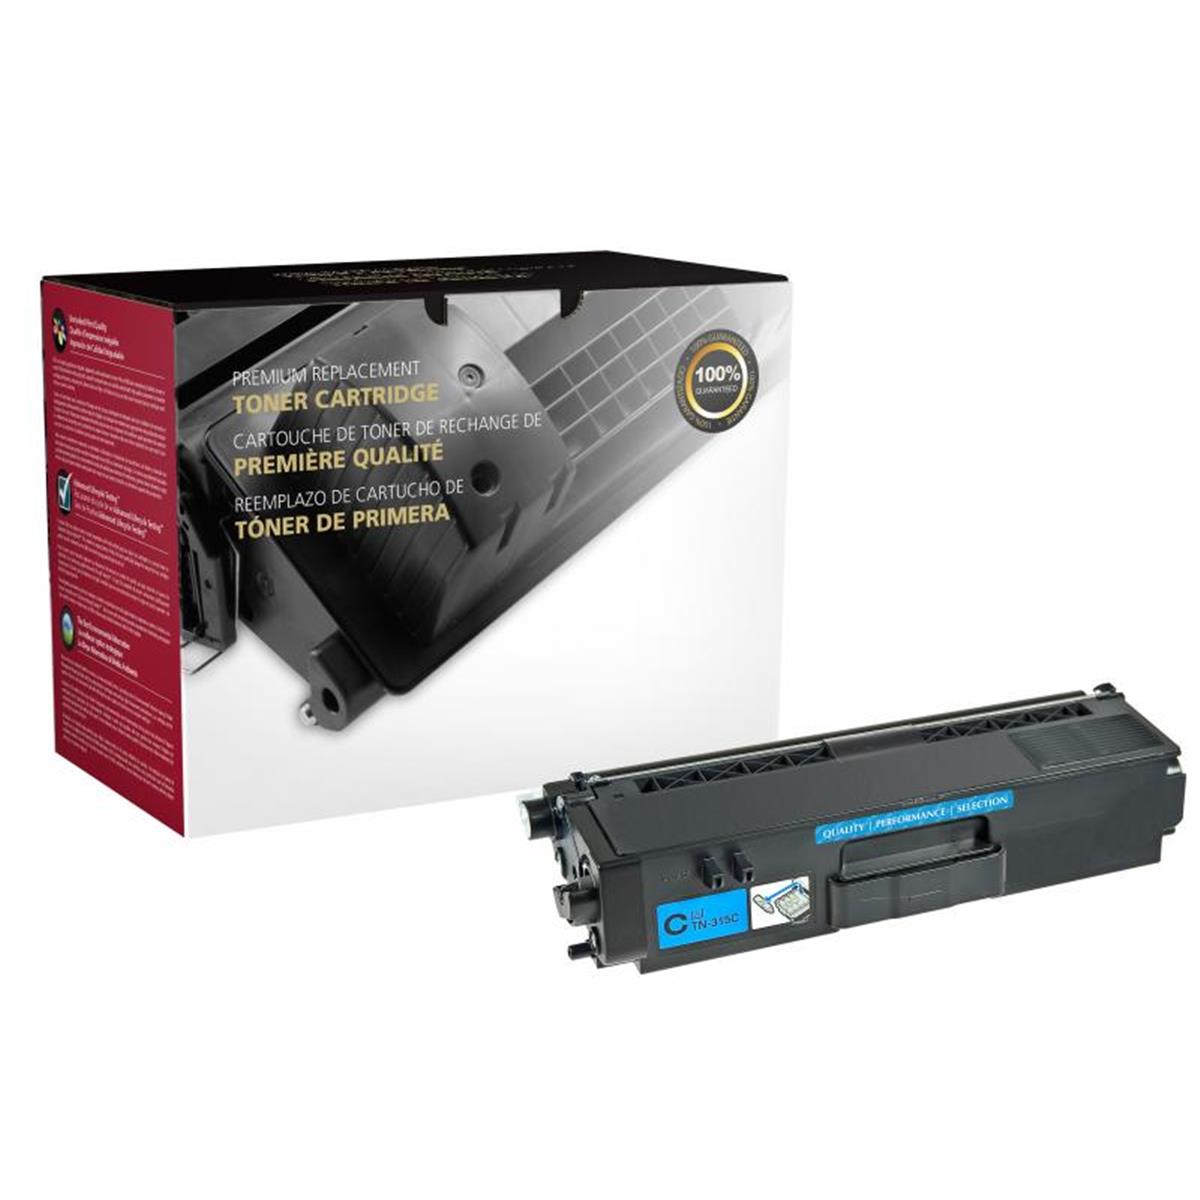 Picture of Brother 200593P Cyan Toner Cartridge for TN310